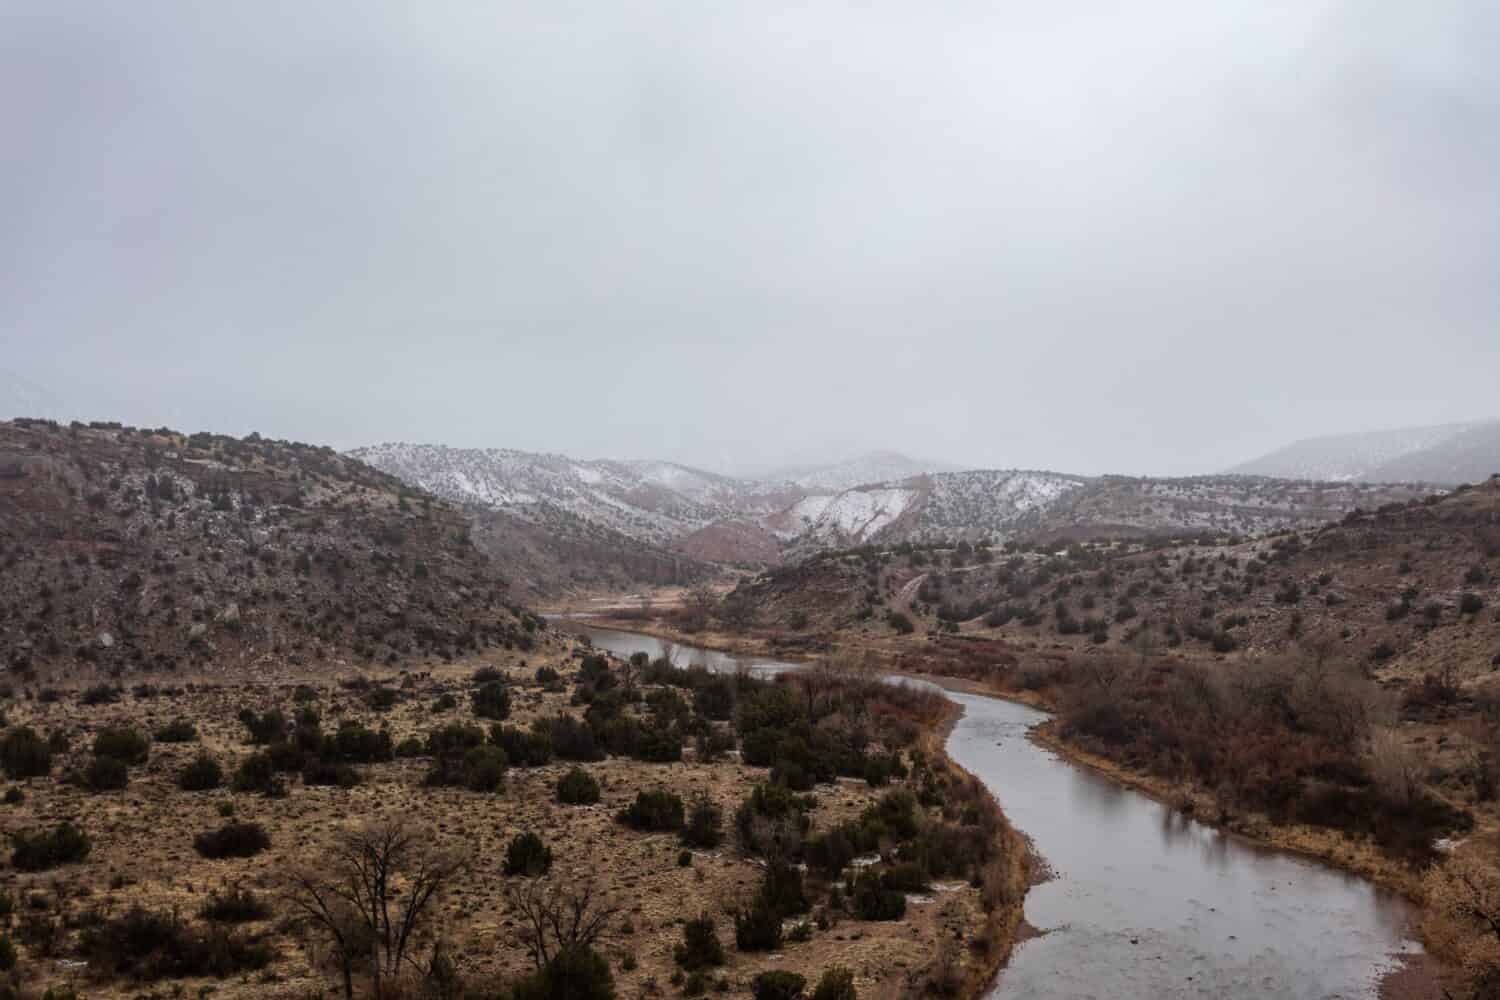 Rio Grande river cutting through large hills covered in bushes and snow on rainy overcast day in rural New Mexico